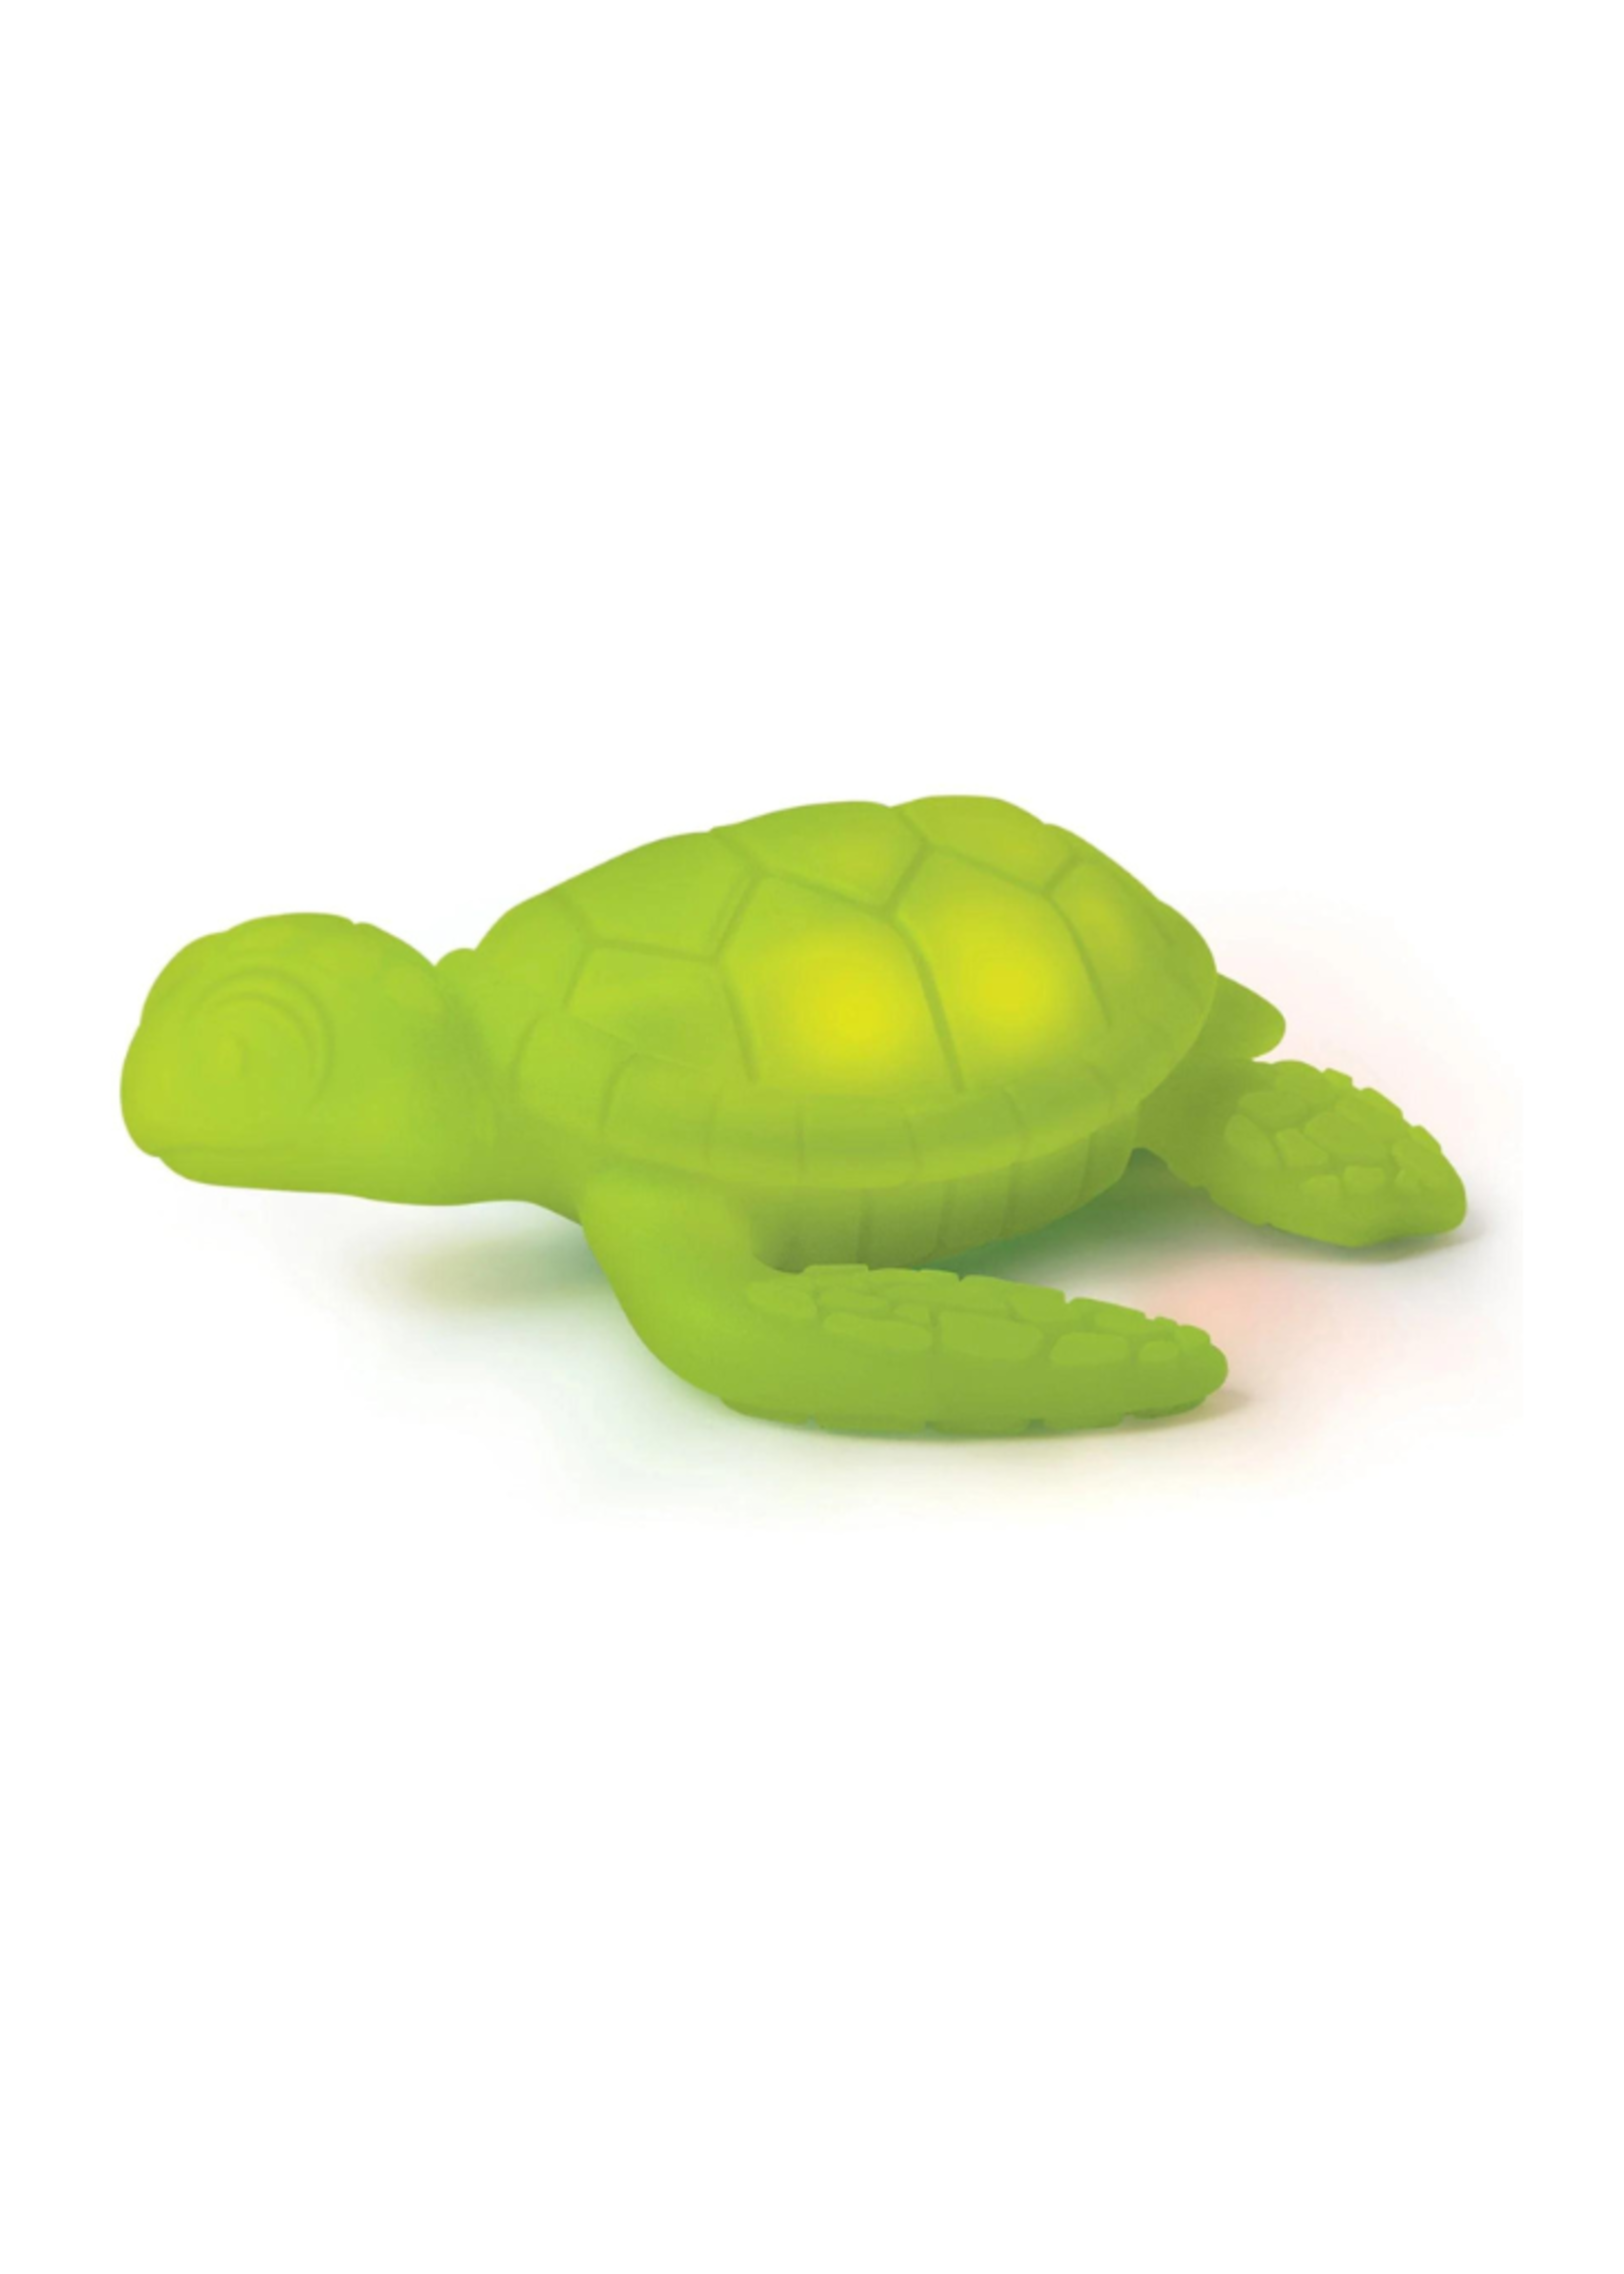 Fred Fred & Friends Tub Turtle Light Up Bath Toy